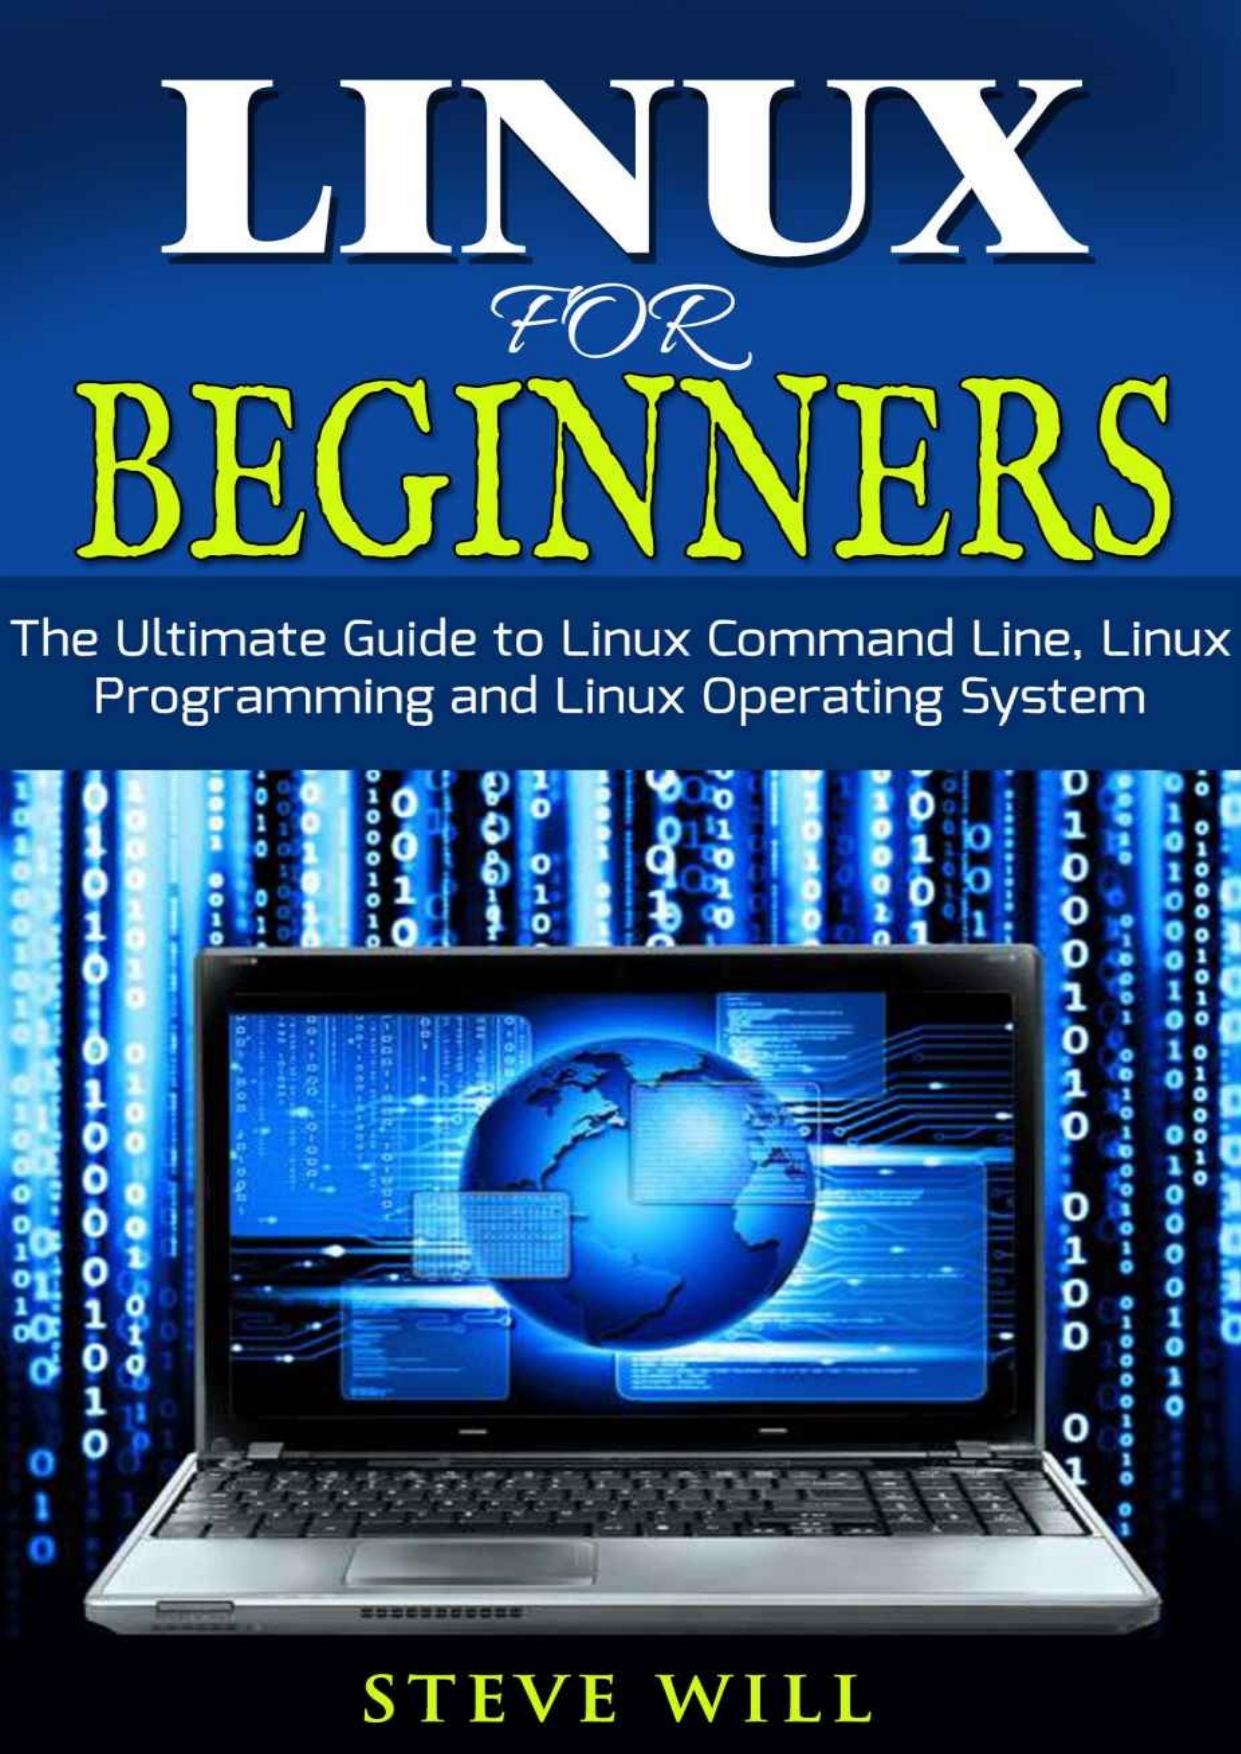 Linux for Beginners: The Ultimate Beginner Guide to Linux Command Line, Linux Programming and Linux Operating System by Steve Will